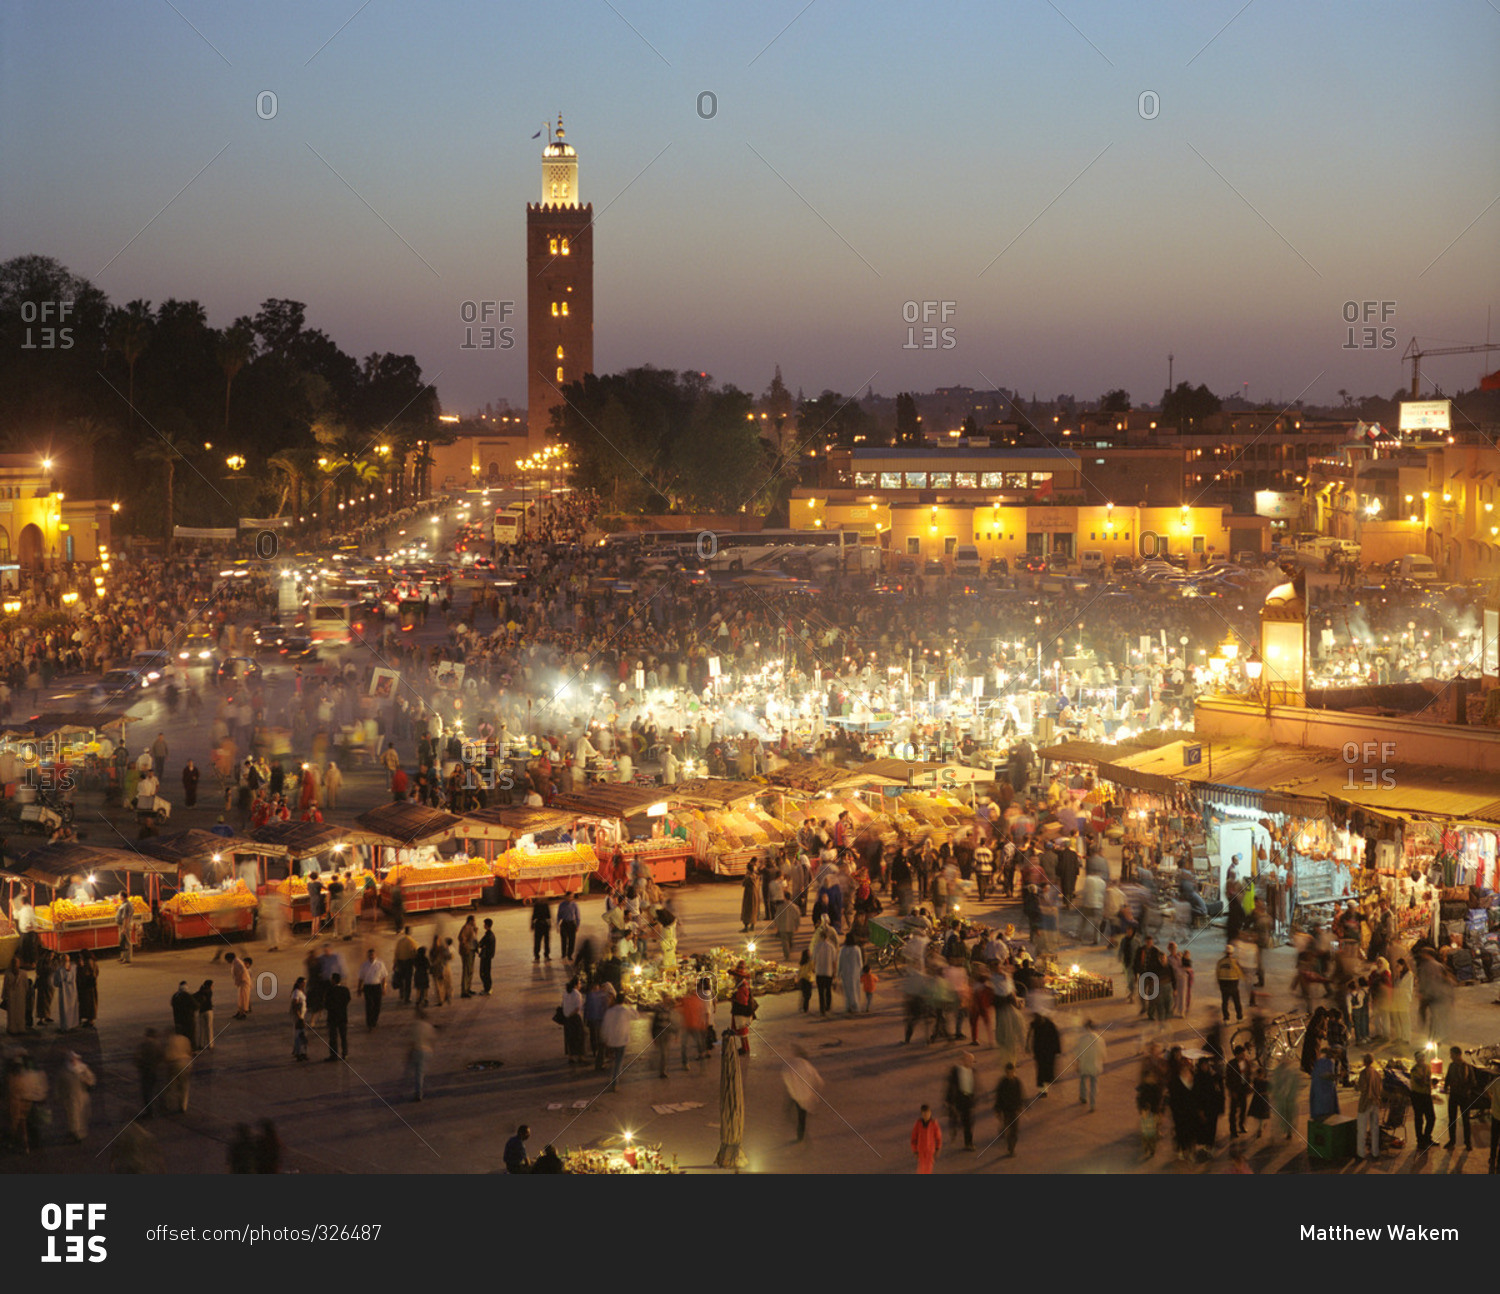 Crowds in market in Moroccan plaza